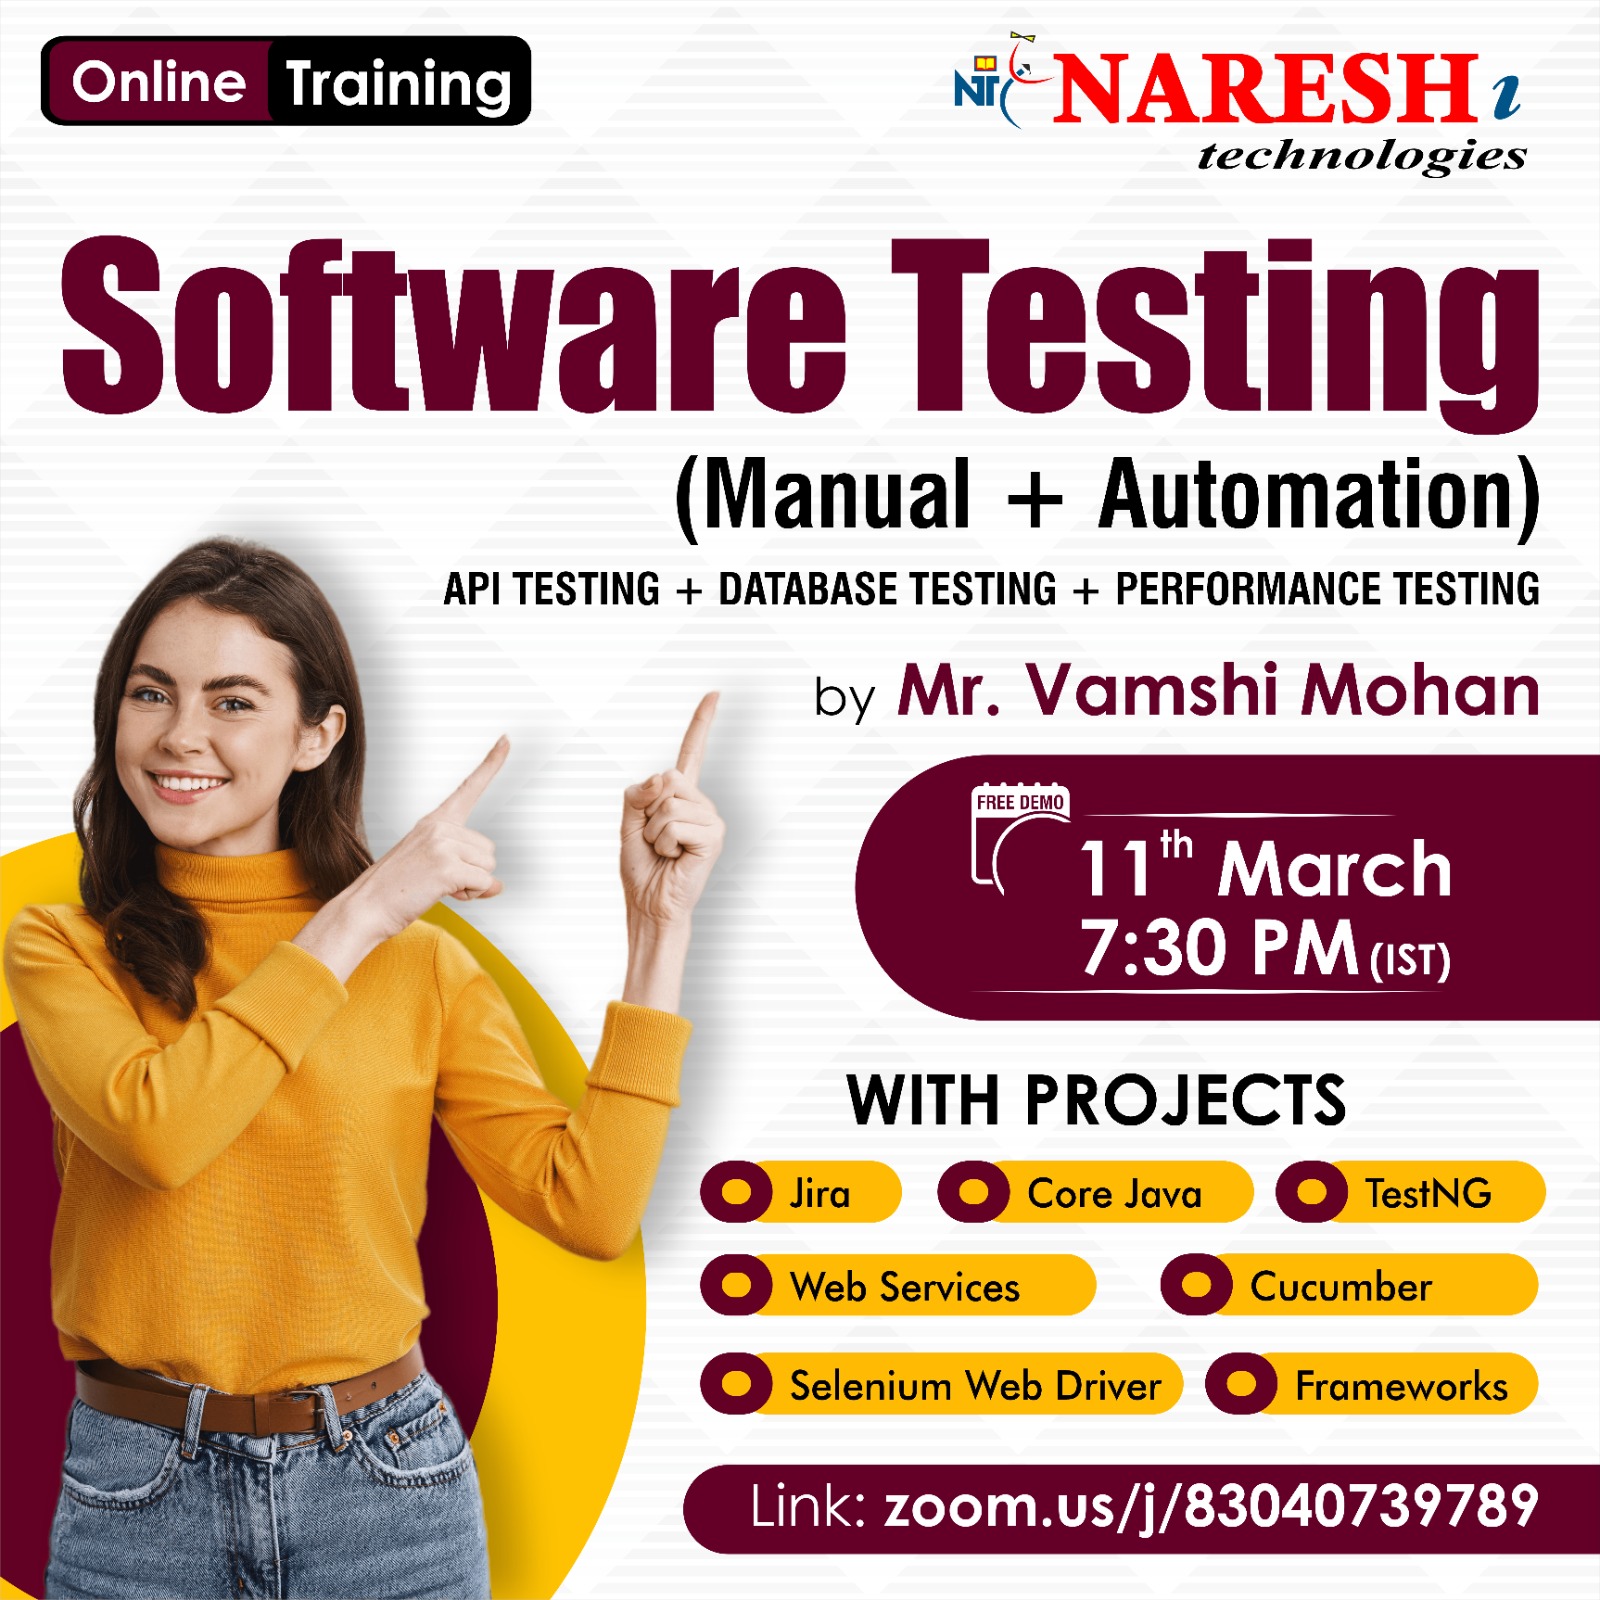 Best Course Selenium By Mr. Vamshi Mohan Online Training in NareshIT, Online Event